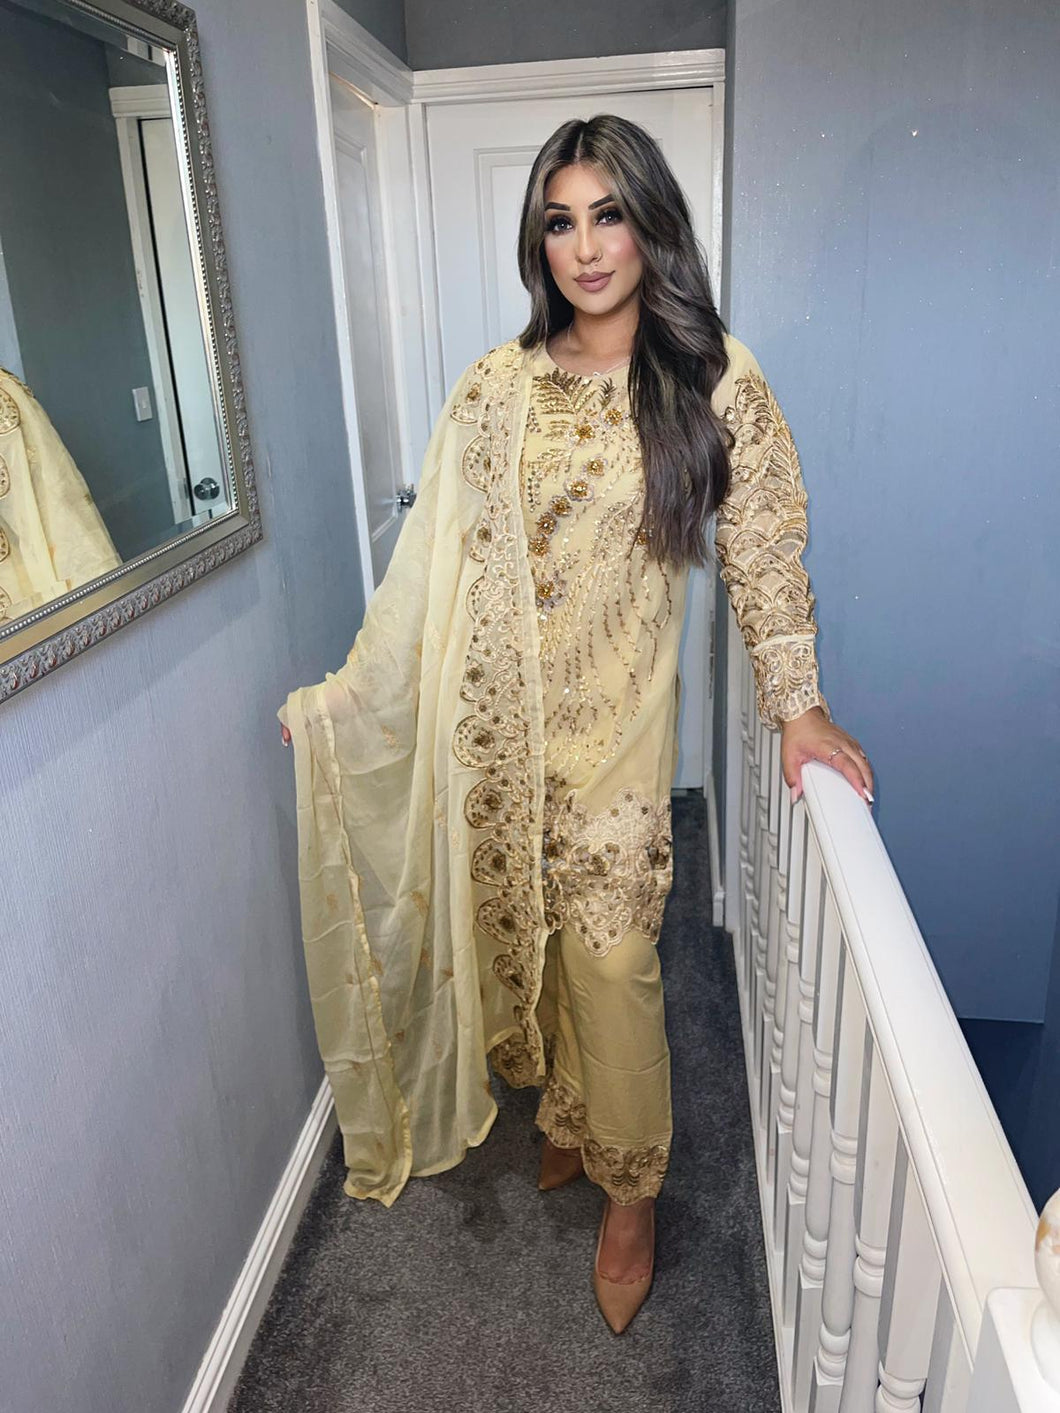 3pc Gold Embroidered Shalwar Kameez with Chiffon dupatta Stitched Suit Ready to wear KHA-GOLD